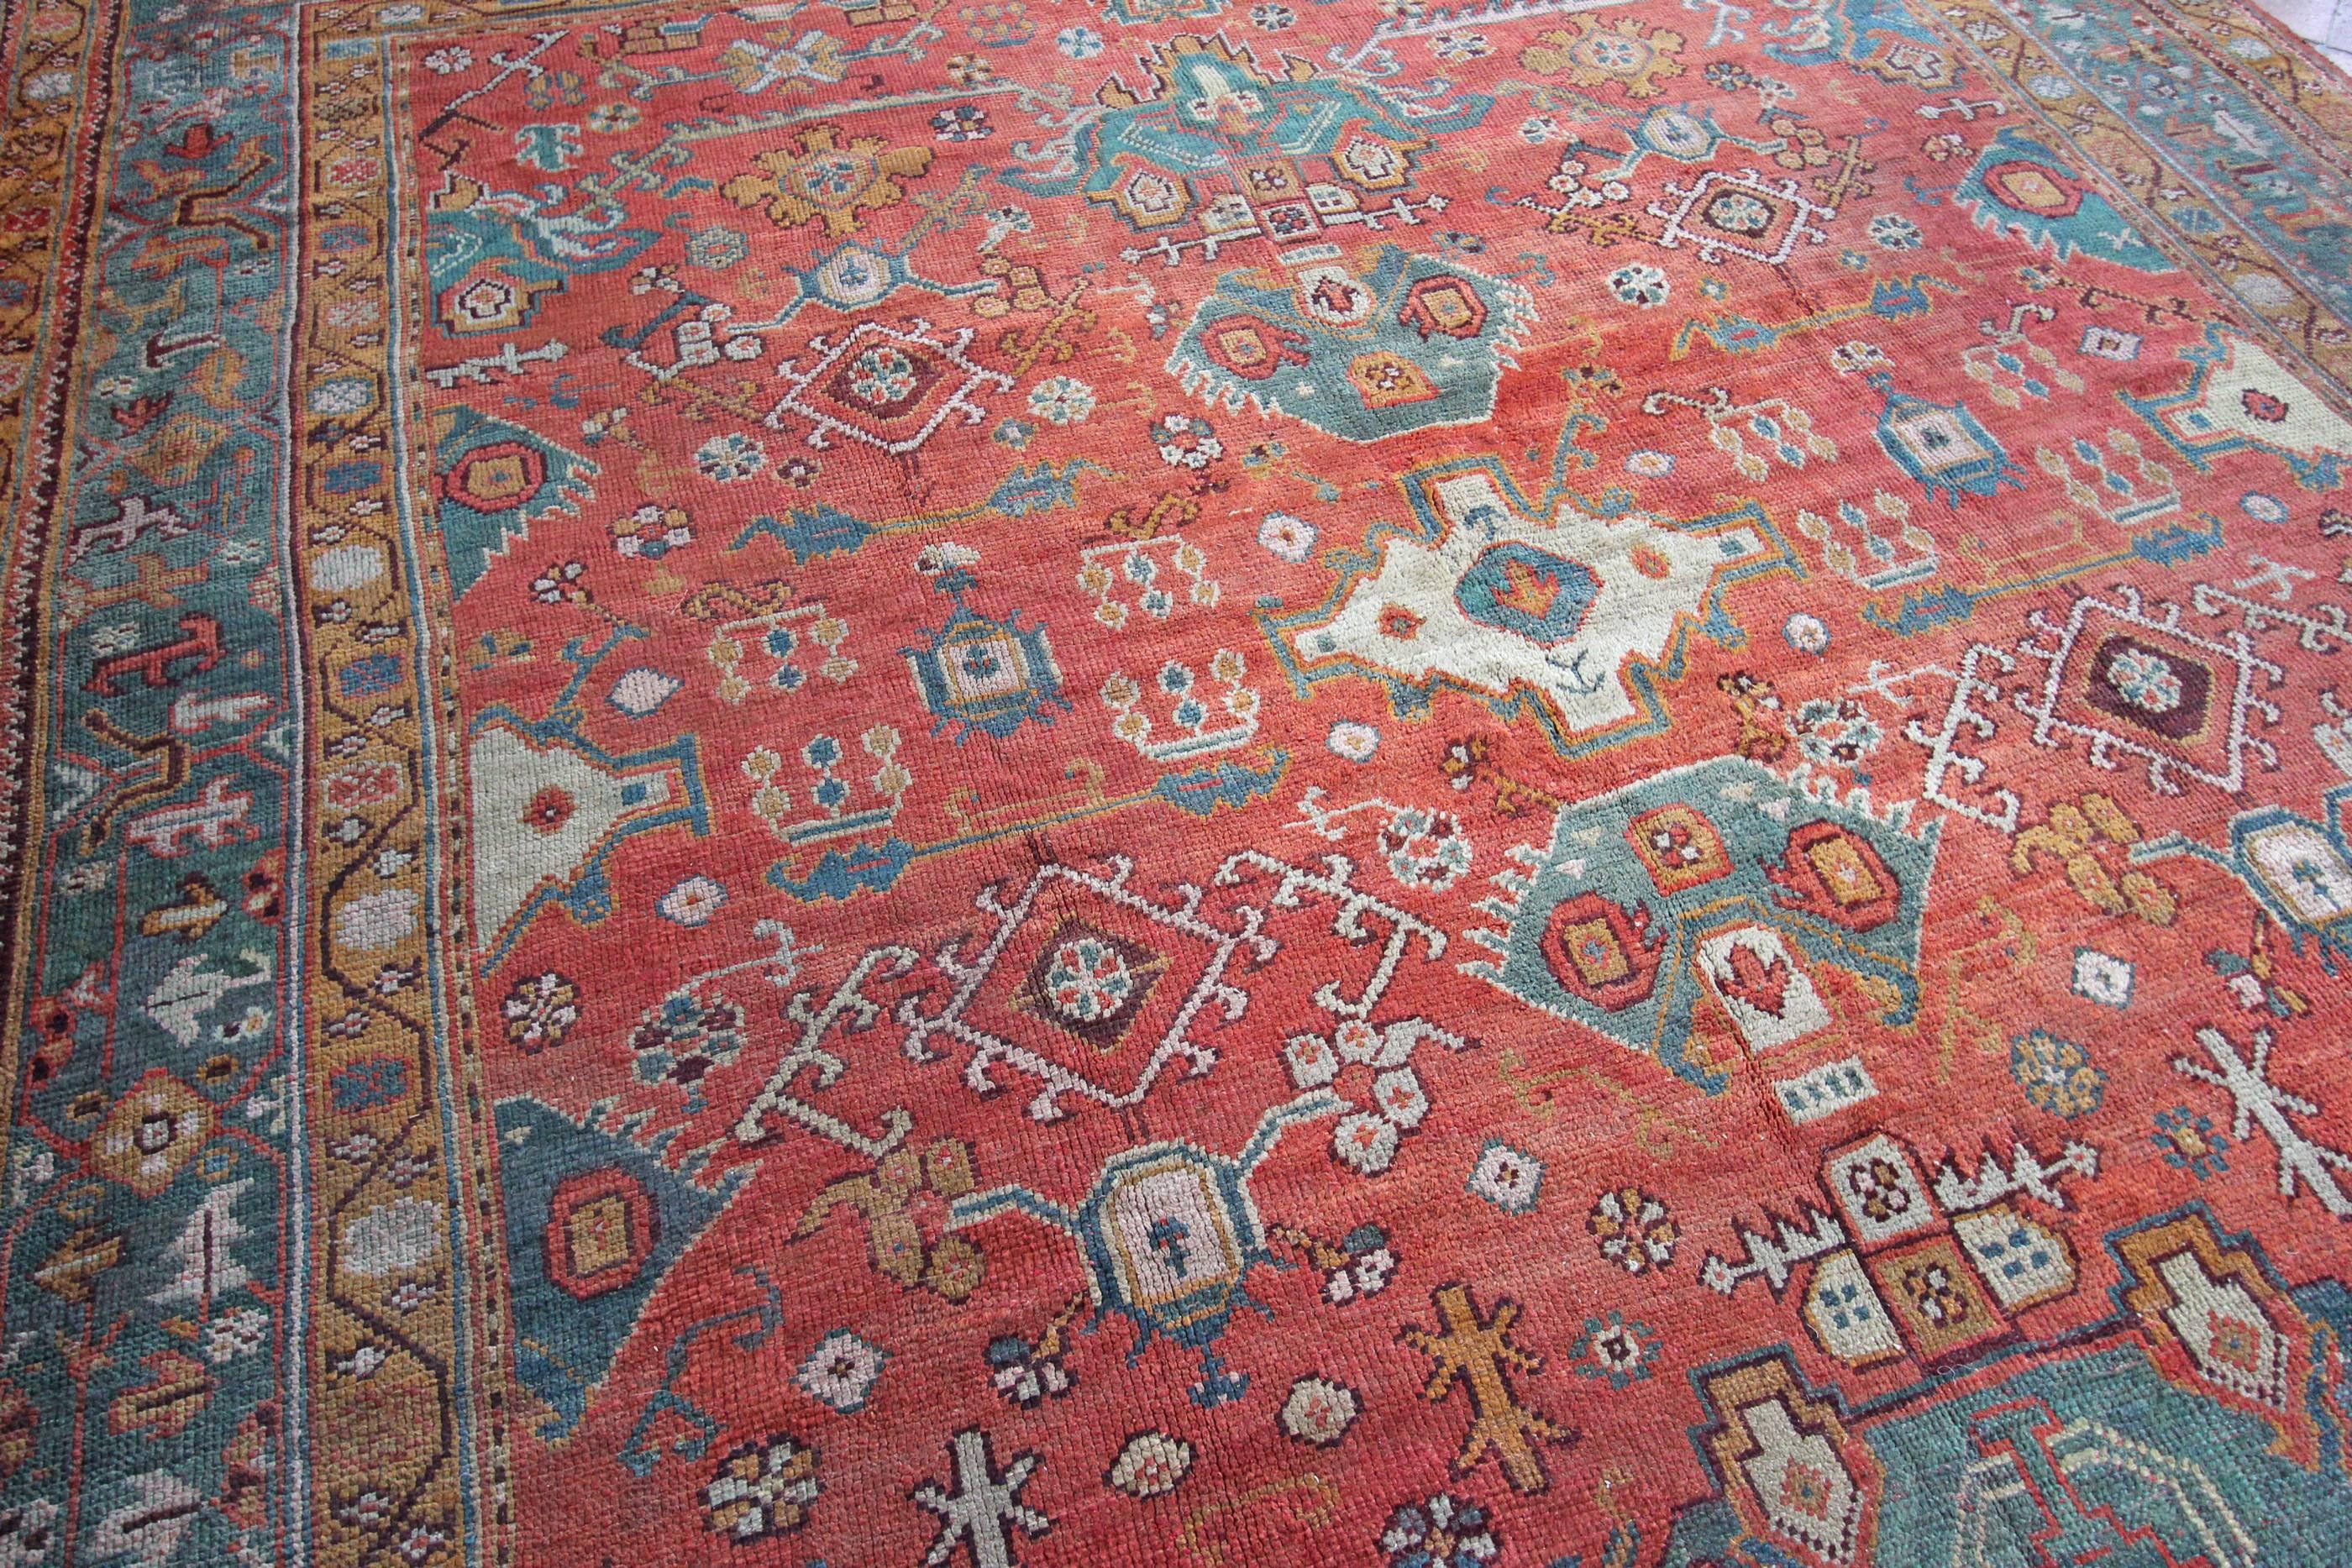 This antique Ushak carpet has been woven with a beautiful variety of greens and soft red/terracotta tones that have mellowed to soft colours due to the carpets age. Created around 1890-1900 for a carpet that is 120 years old it is in excellent